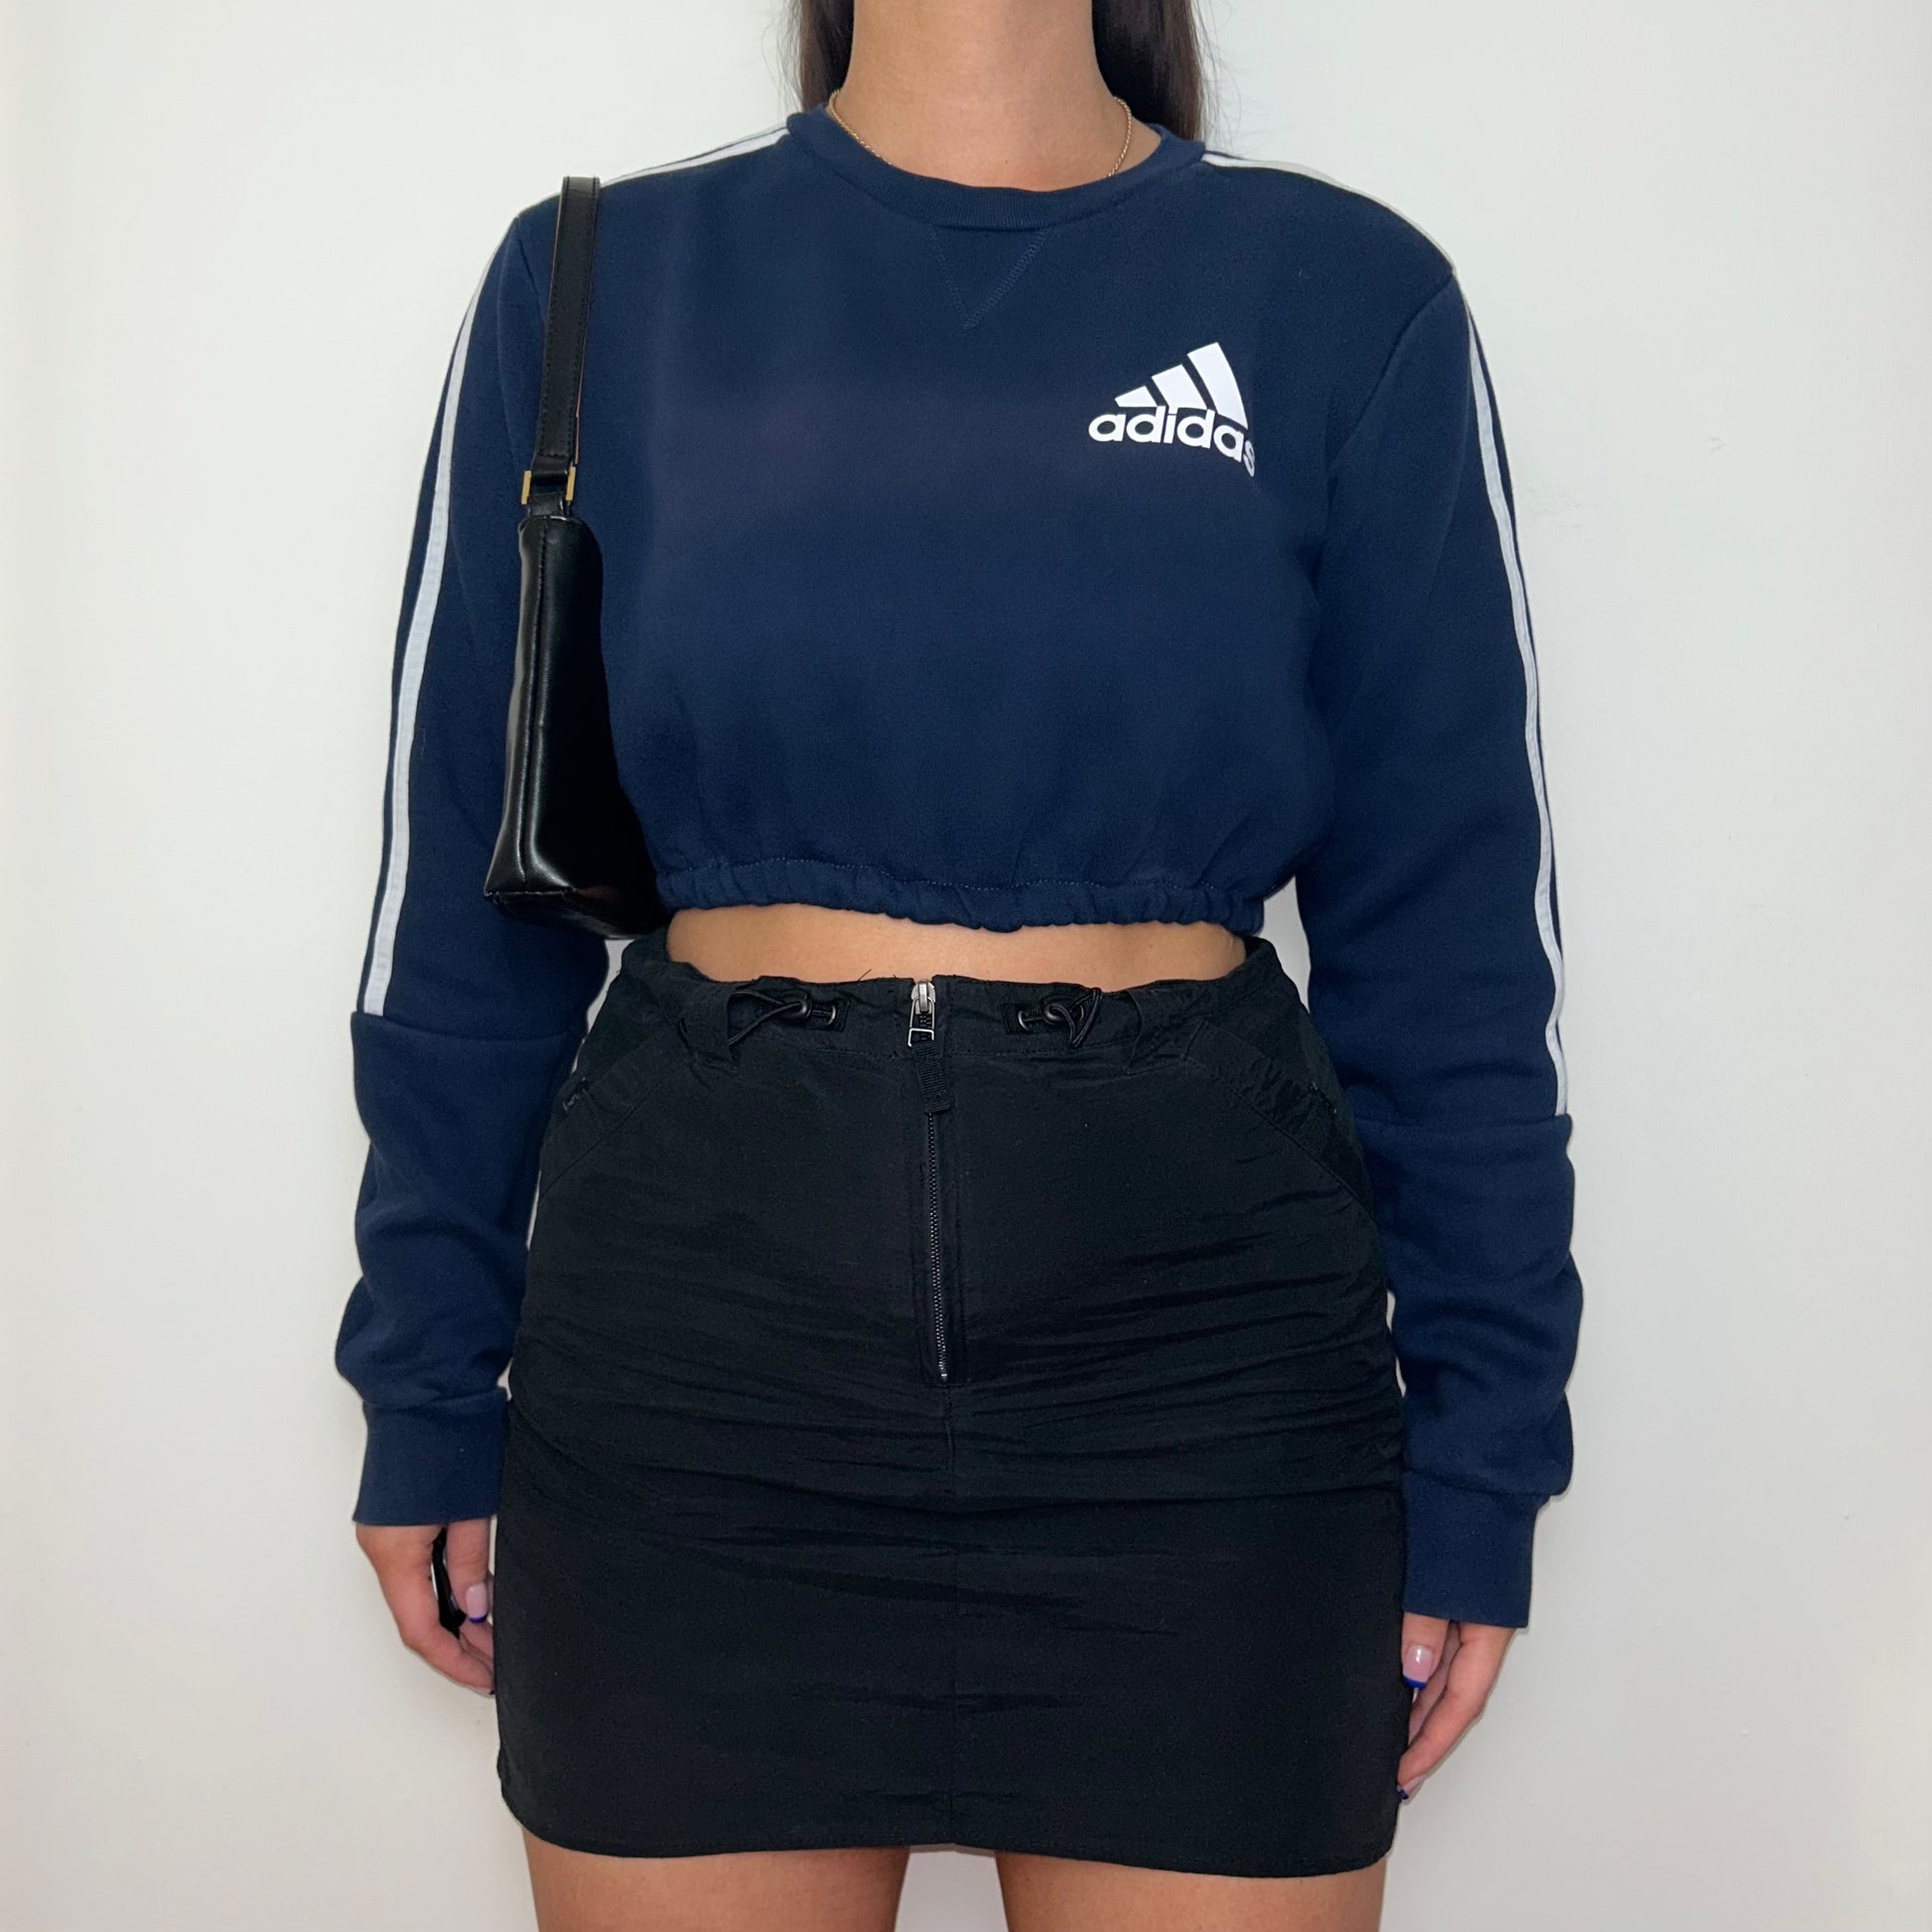 navy cropped sweatshirt with white adidas logo shown on a model wearing a black mini skirt and black shoulder bag